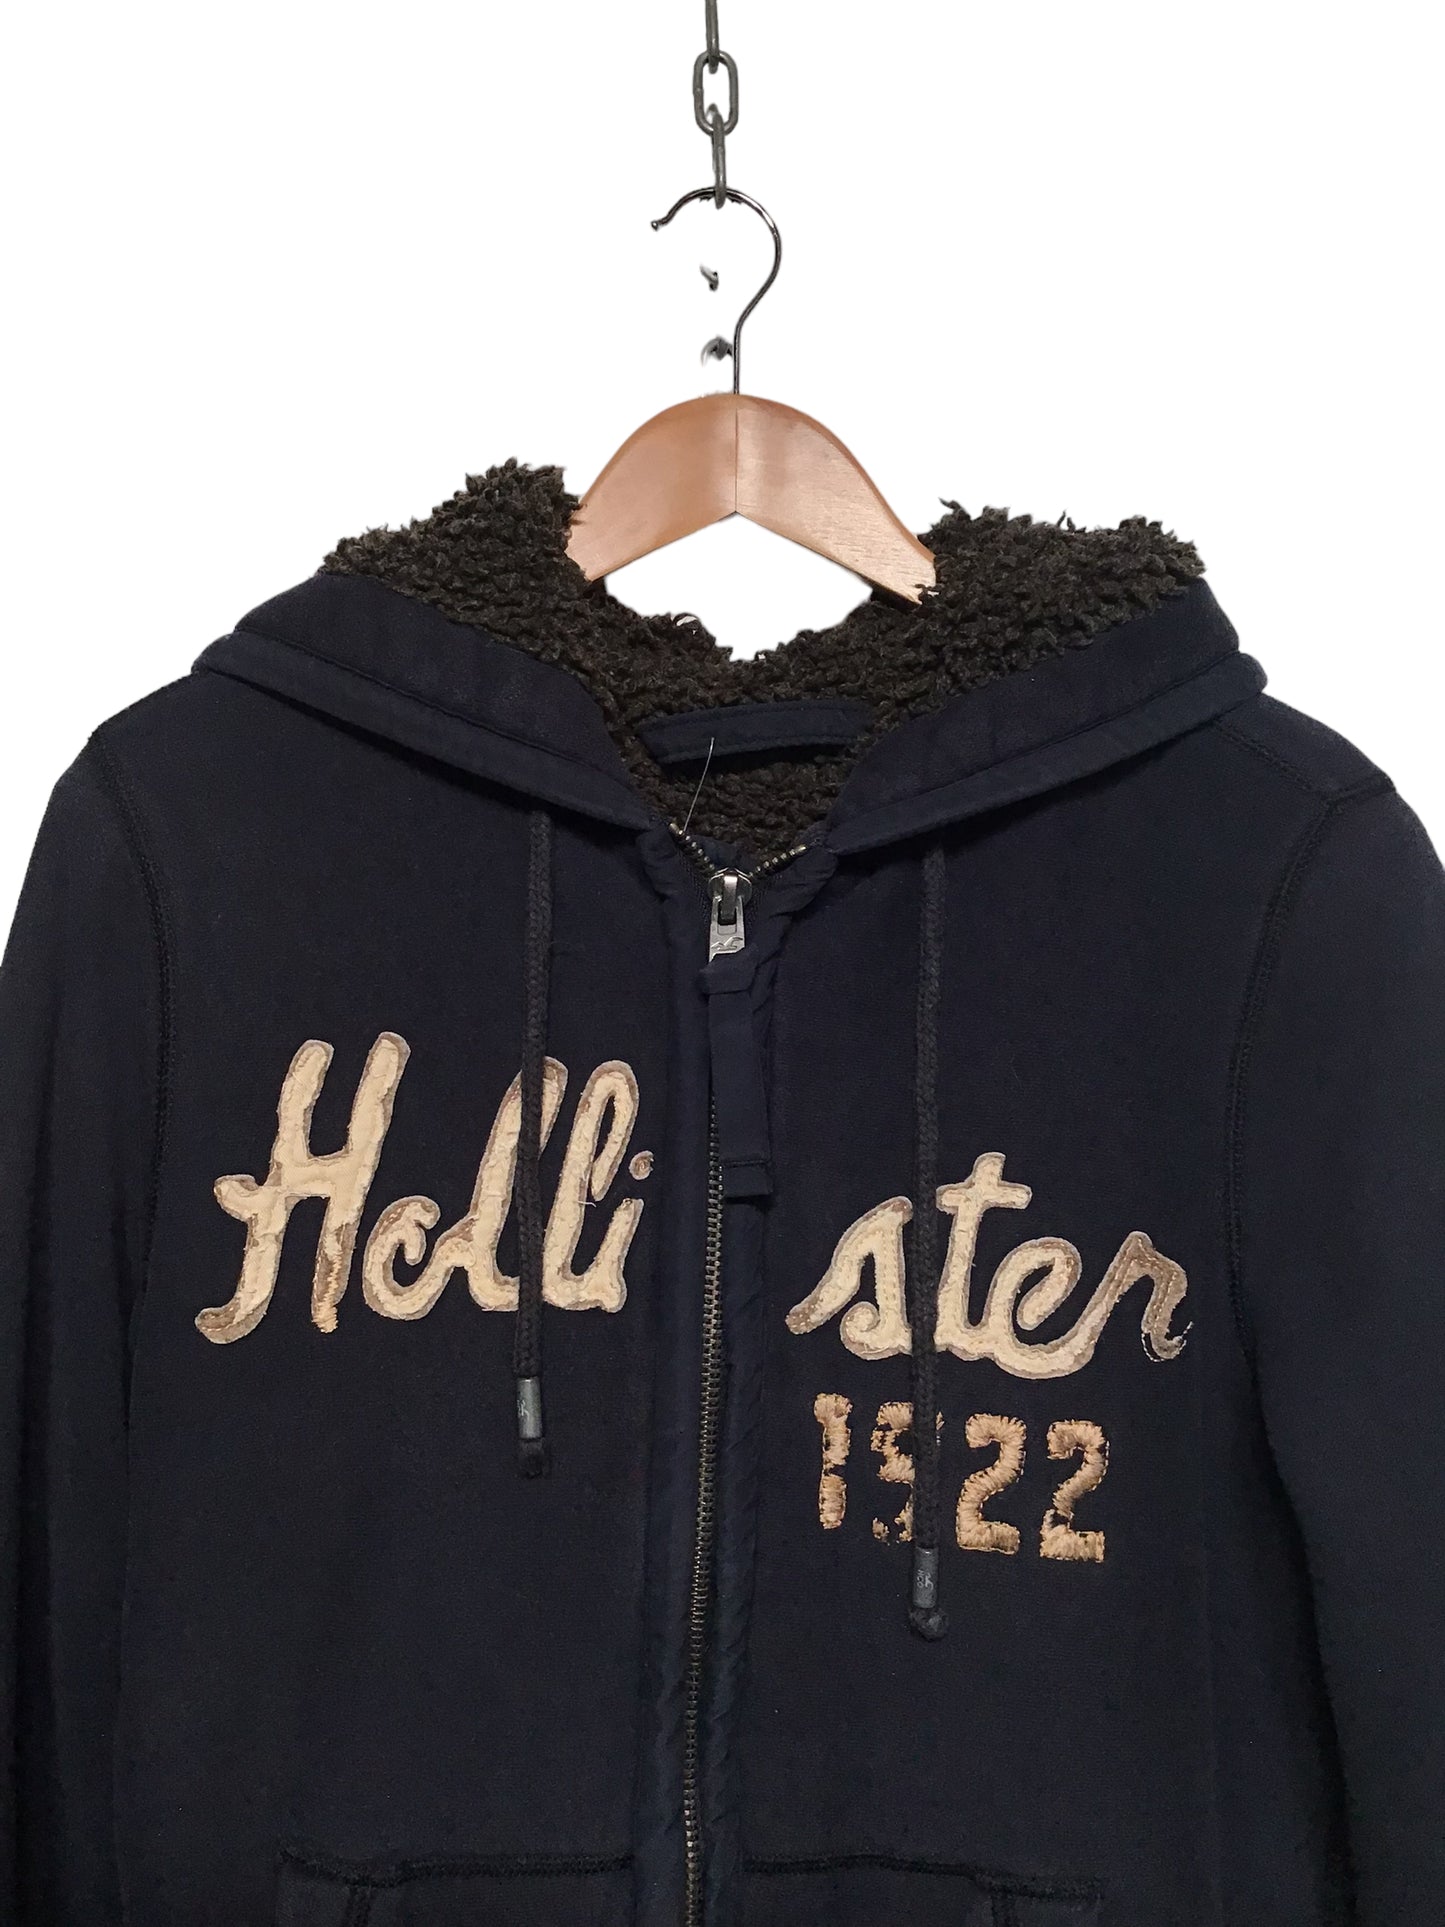 Hollister Hoodie with a Zip (Size M)